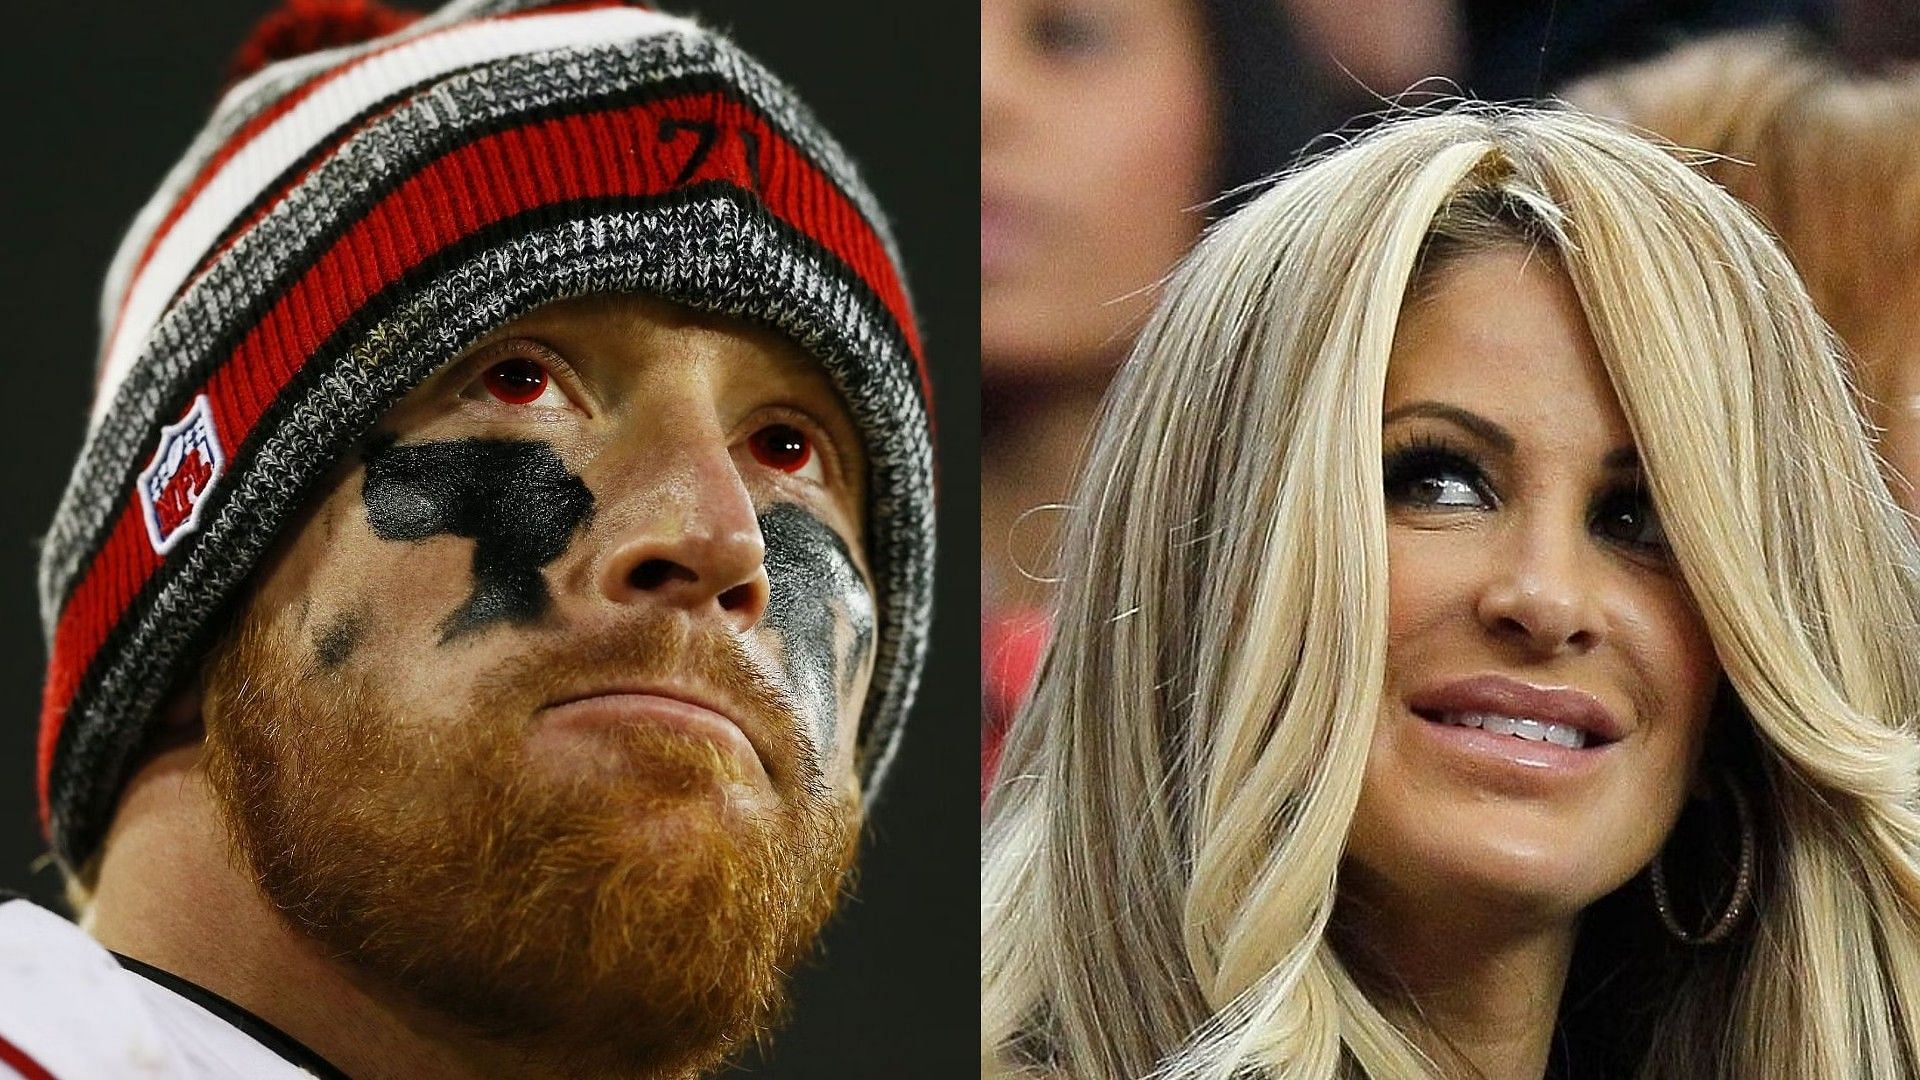 Kroy Biermann gets hit with expensive lawsuit for BMW car